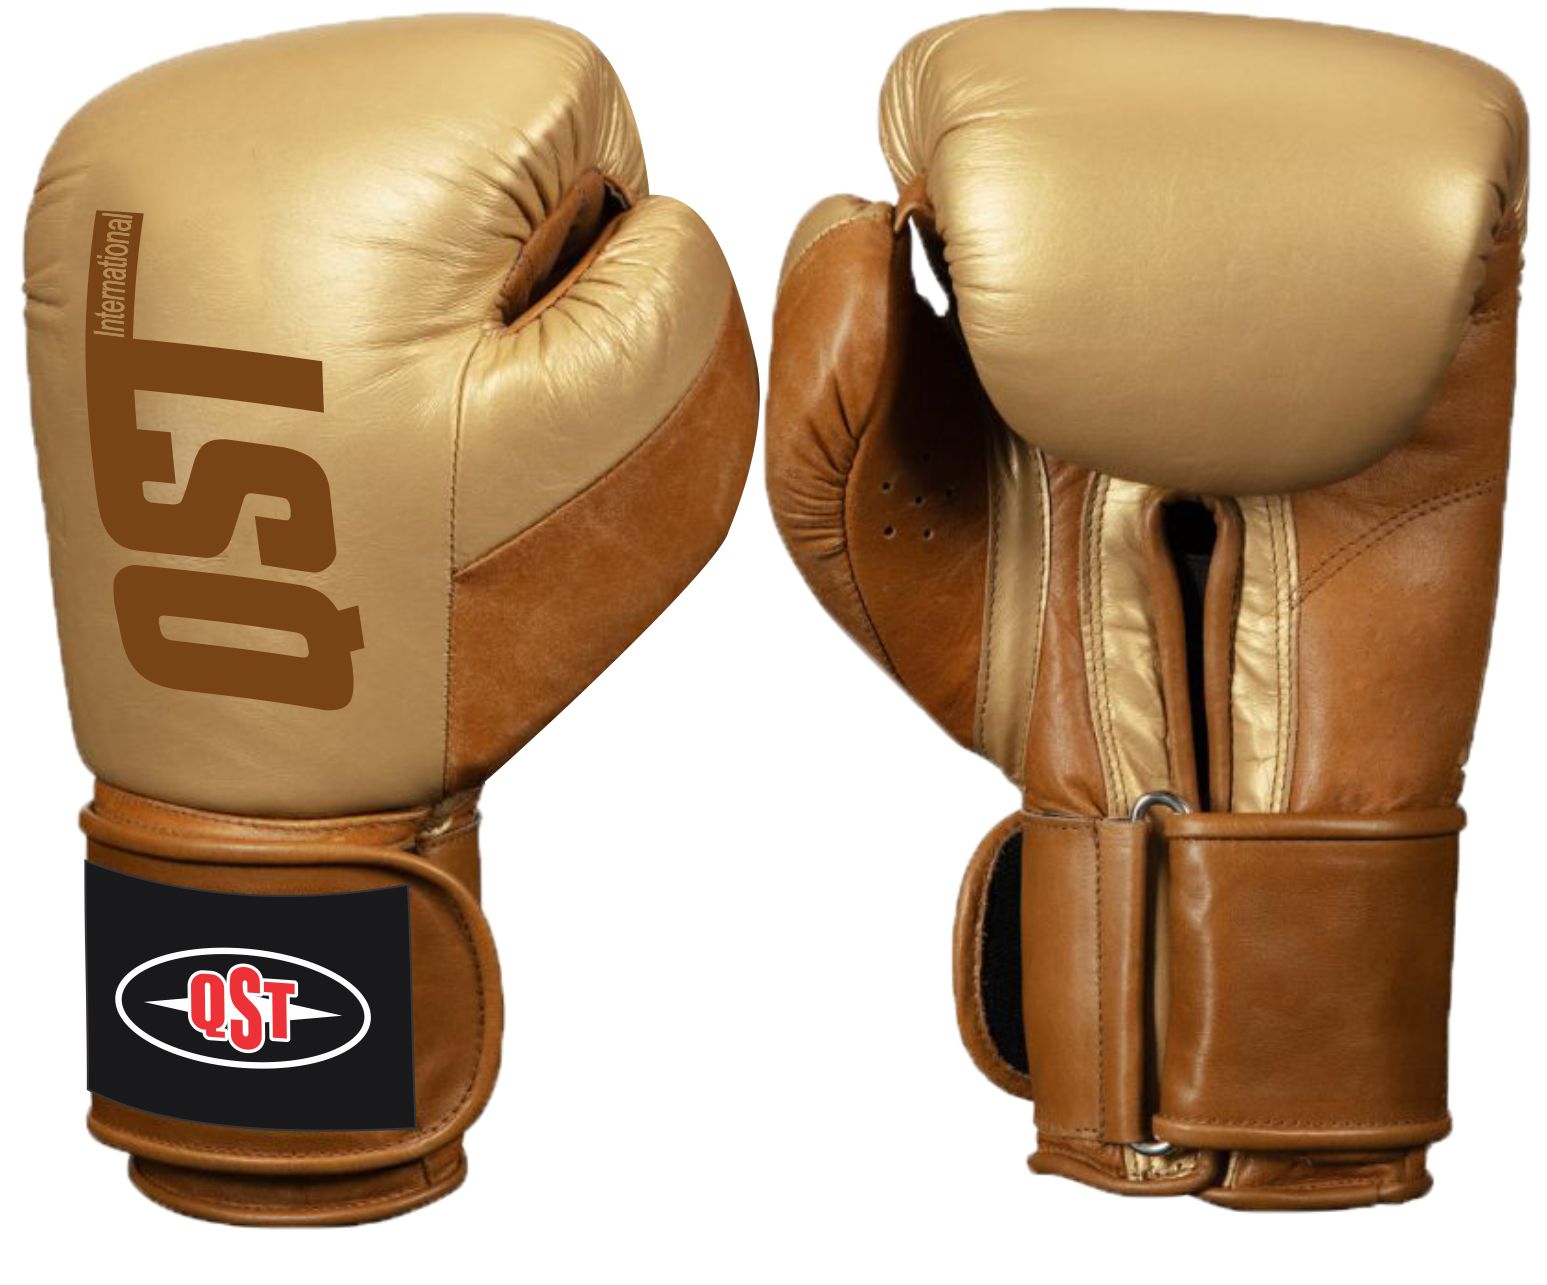 Professional Boxing Gloves - PRG-1507